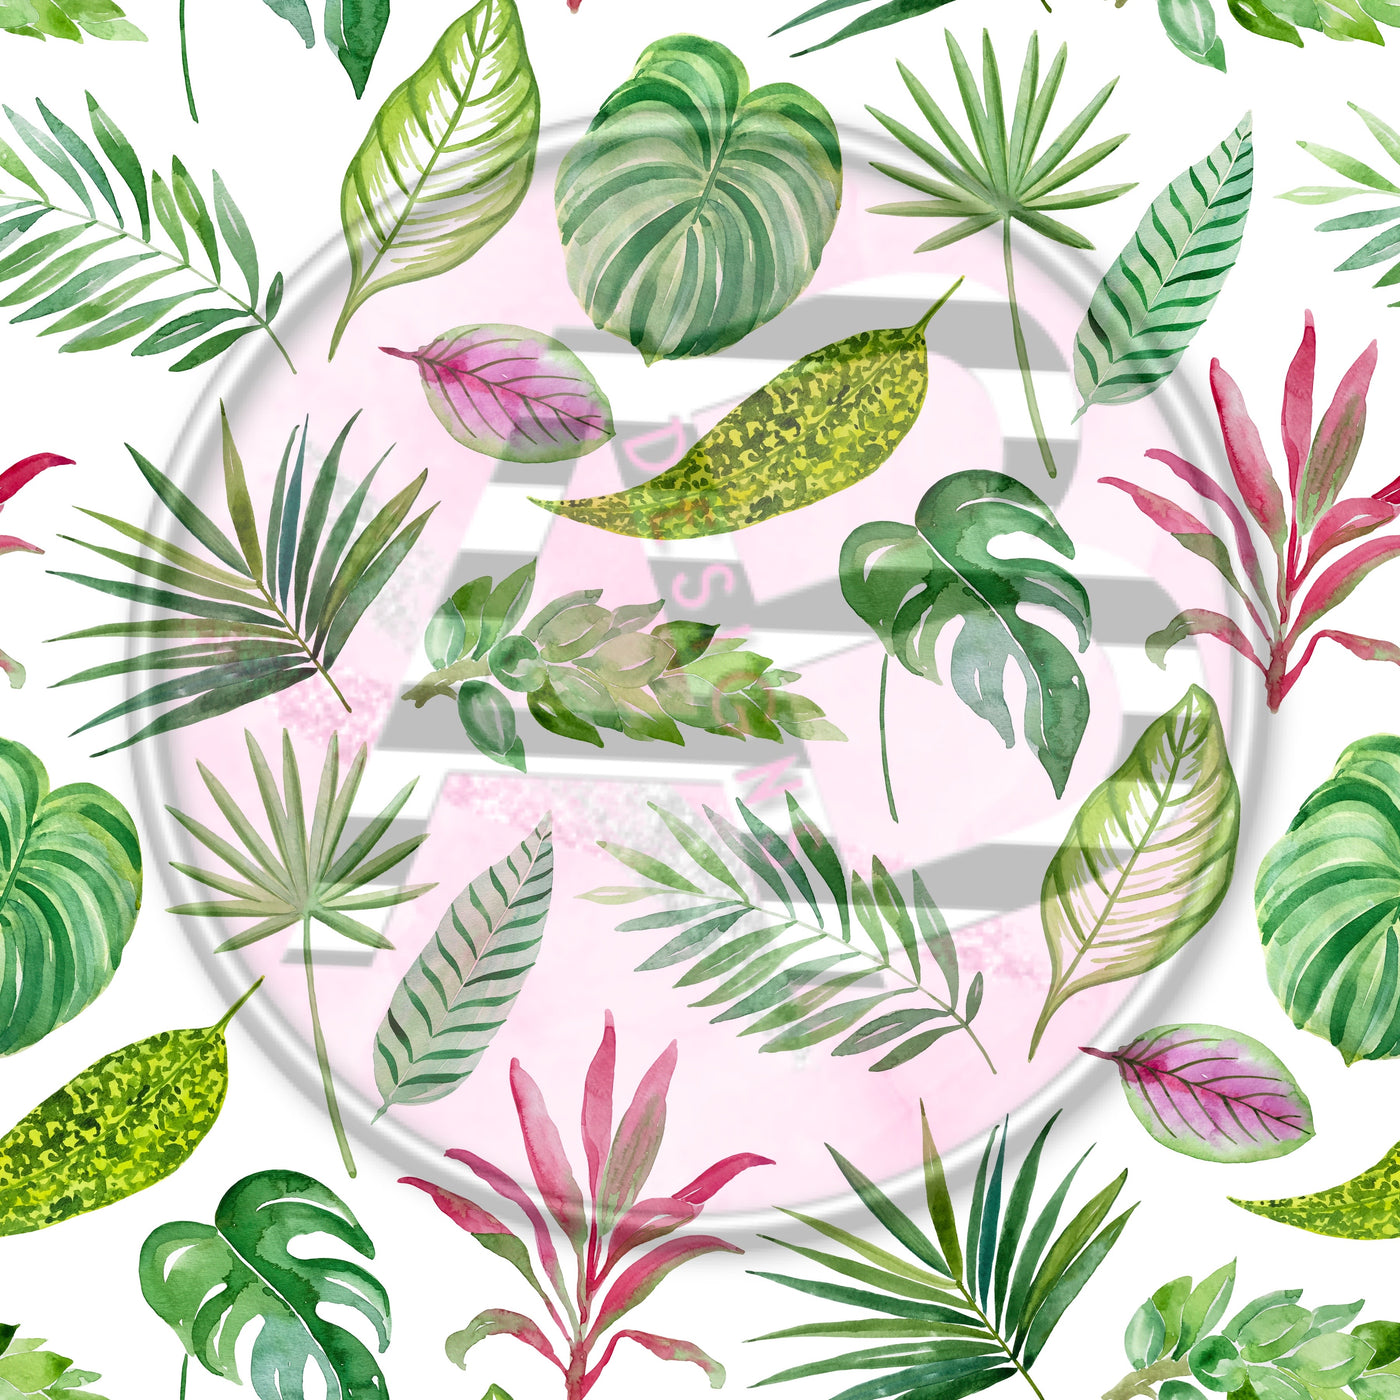 Adhesive Patterned Vinyl - Tropical 2138